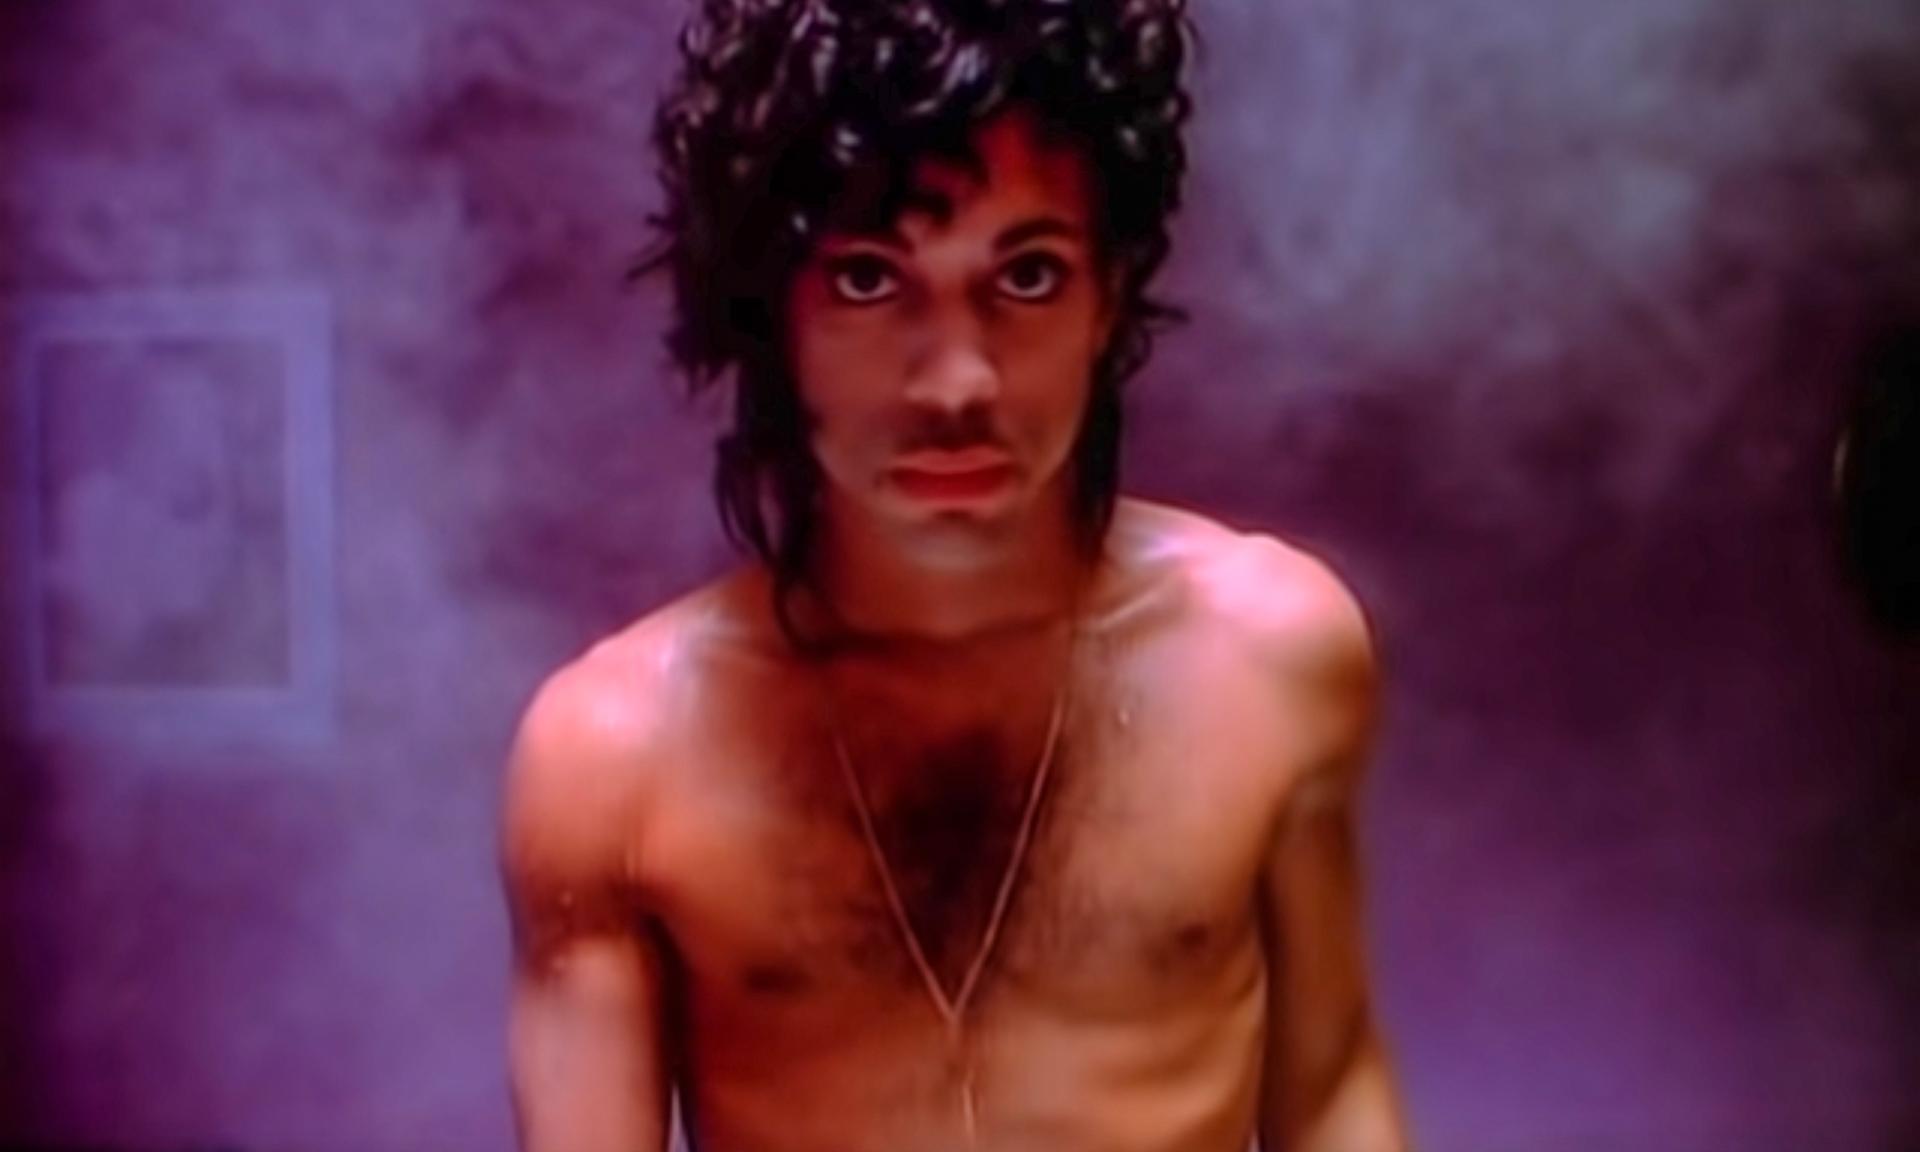 A screenshot from Prince’s music video “When Doves Cry.”